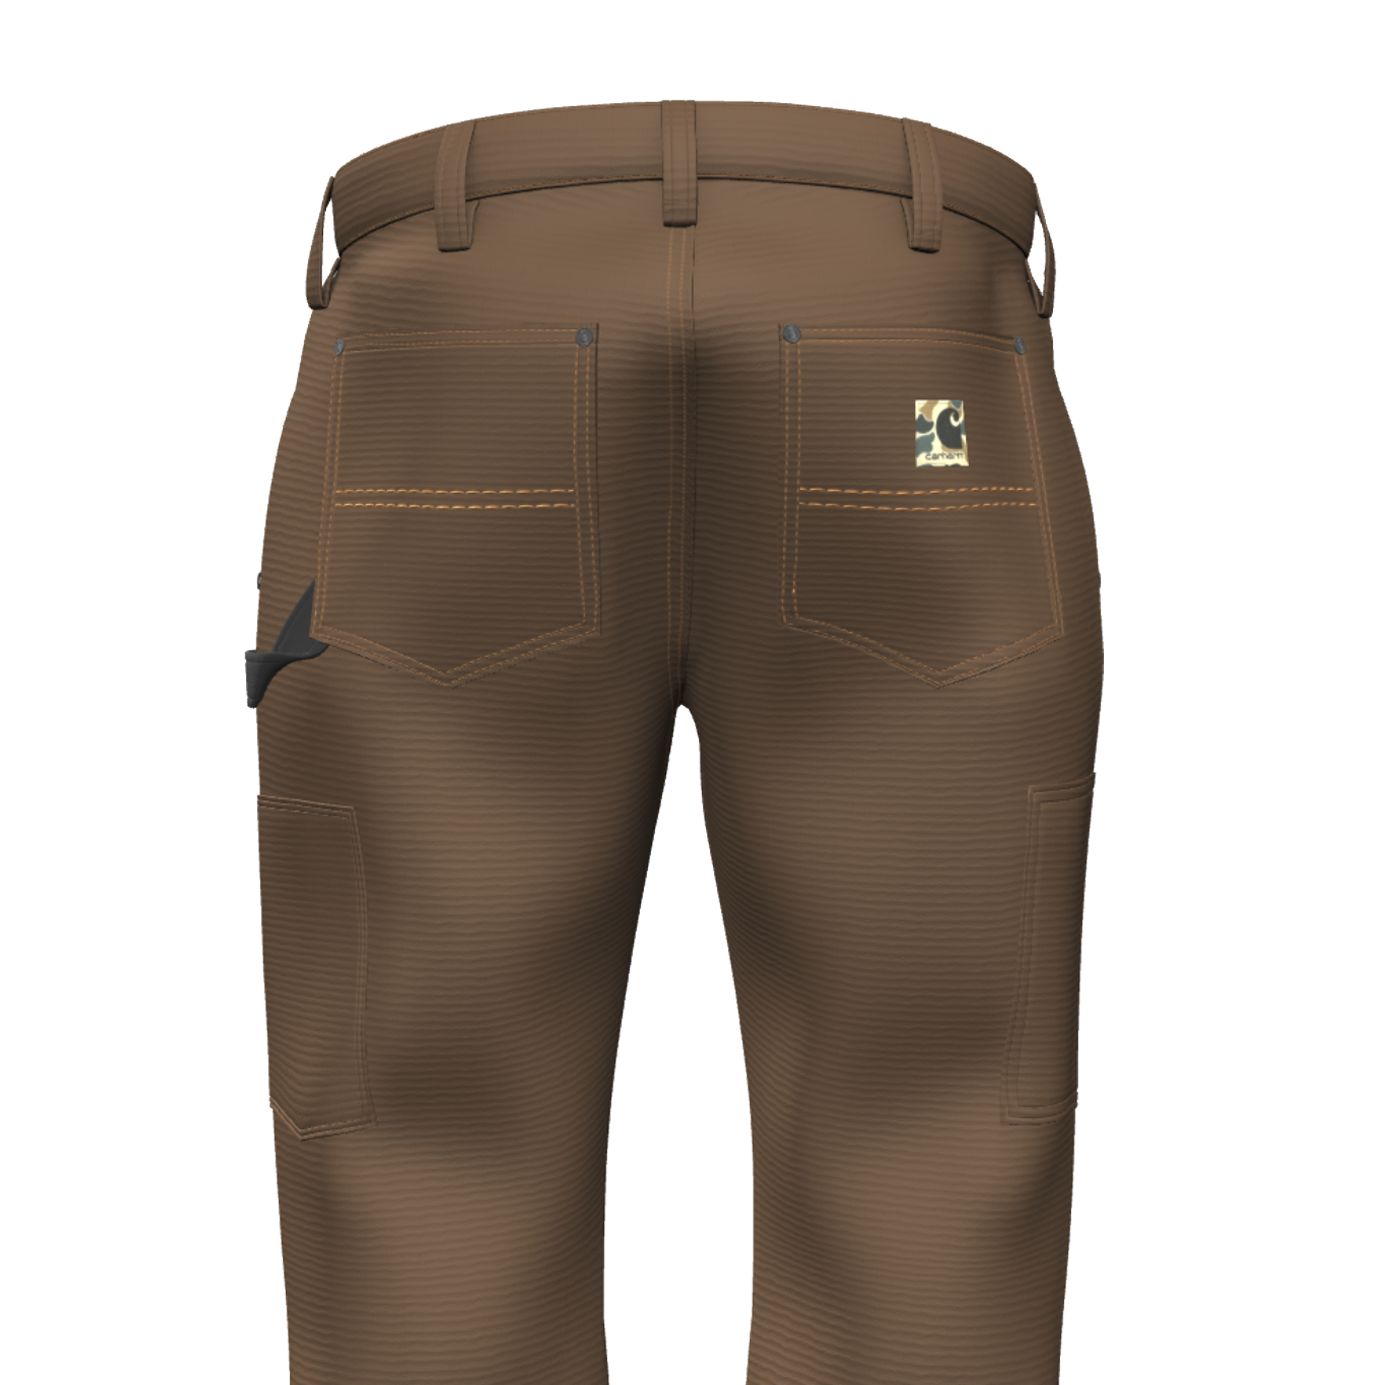 What Are Carhartt Pants Made Of? – Majesda